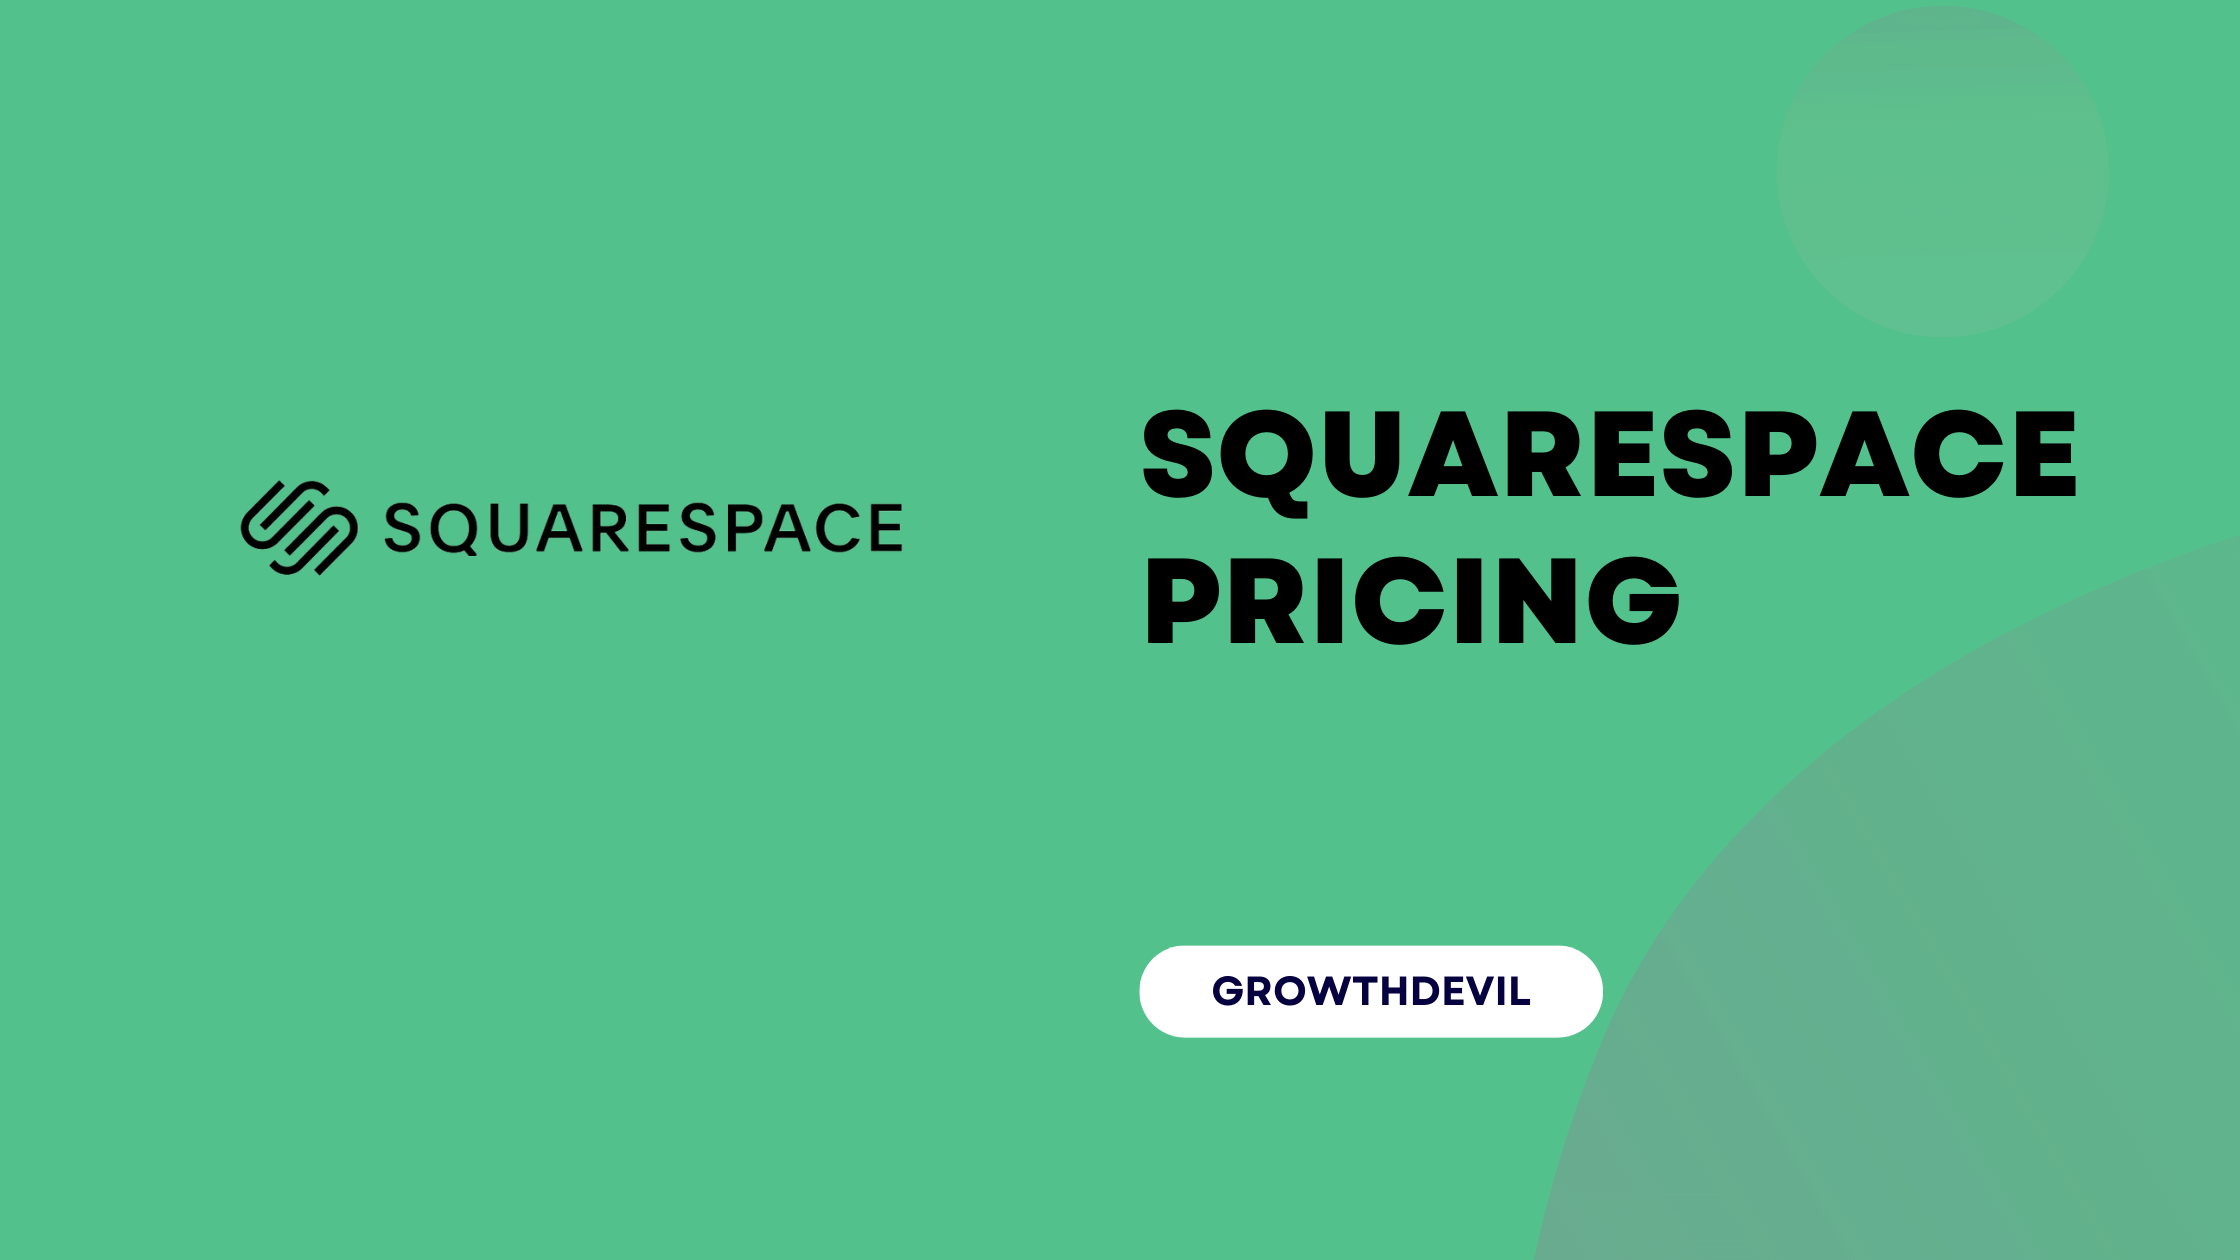 Squarespace Pricing - GrowthDevil